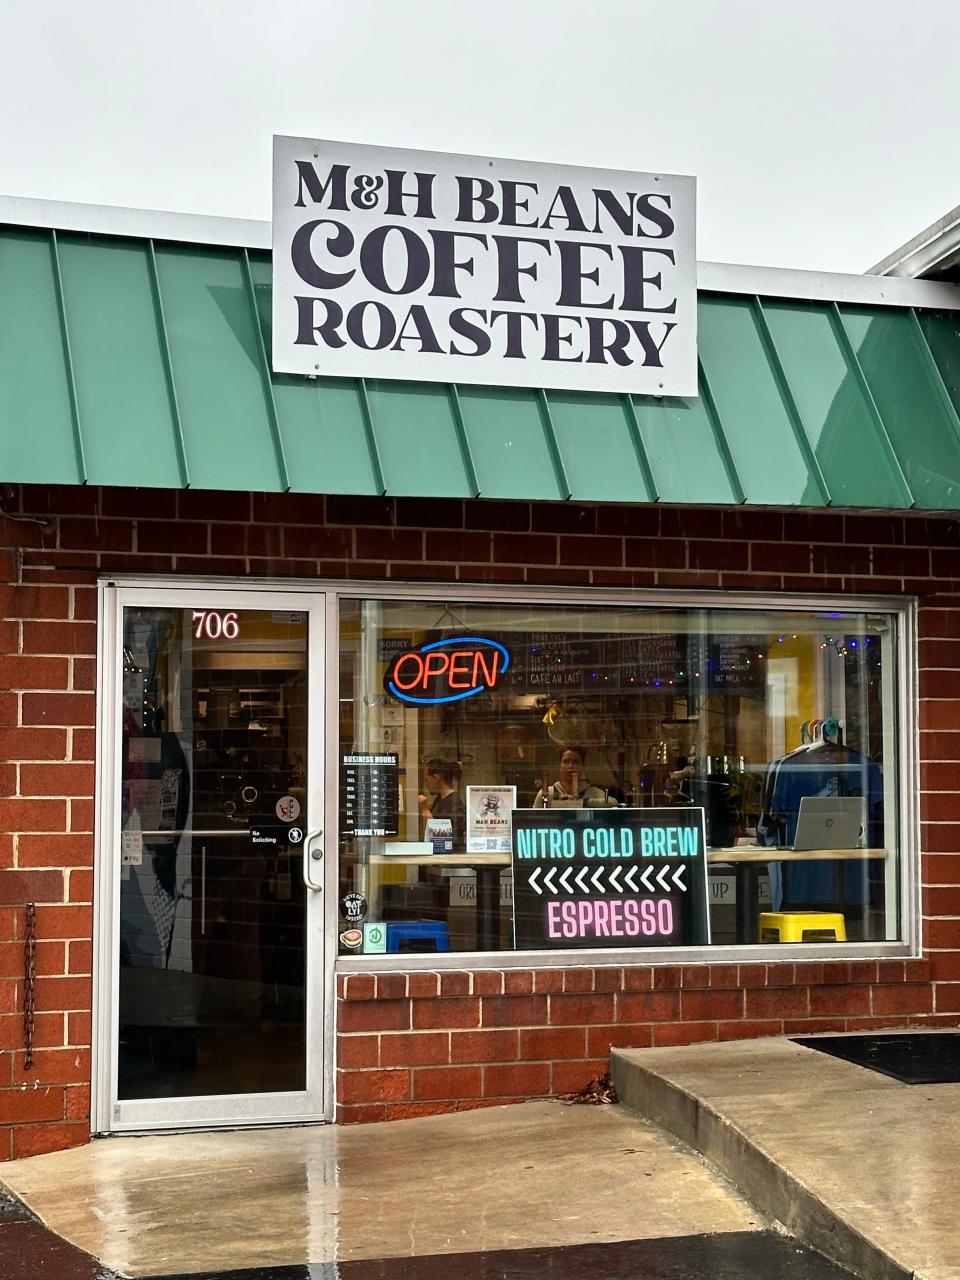 M&H Beans Coffee Roastery is located on South Main Street in North Canton, next to Pav's Creamery.